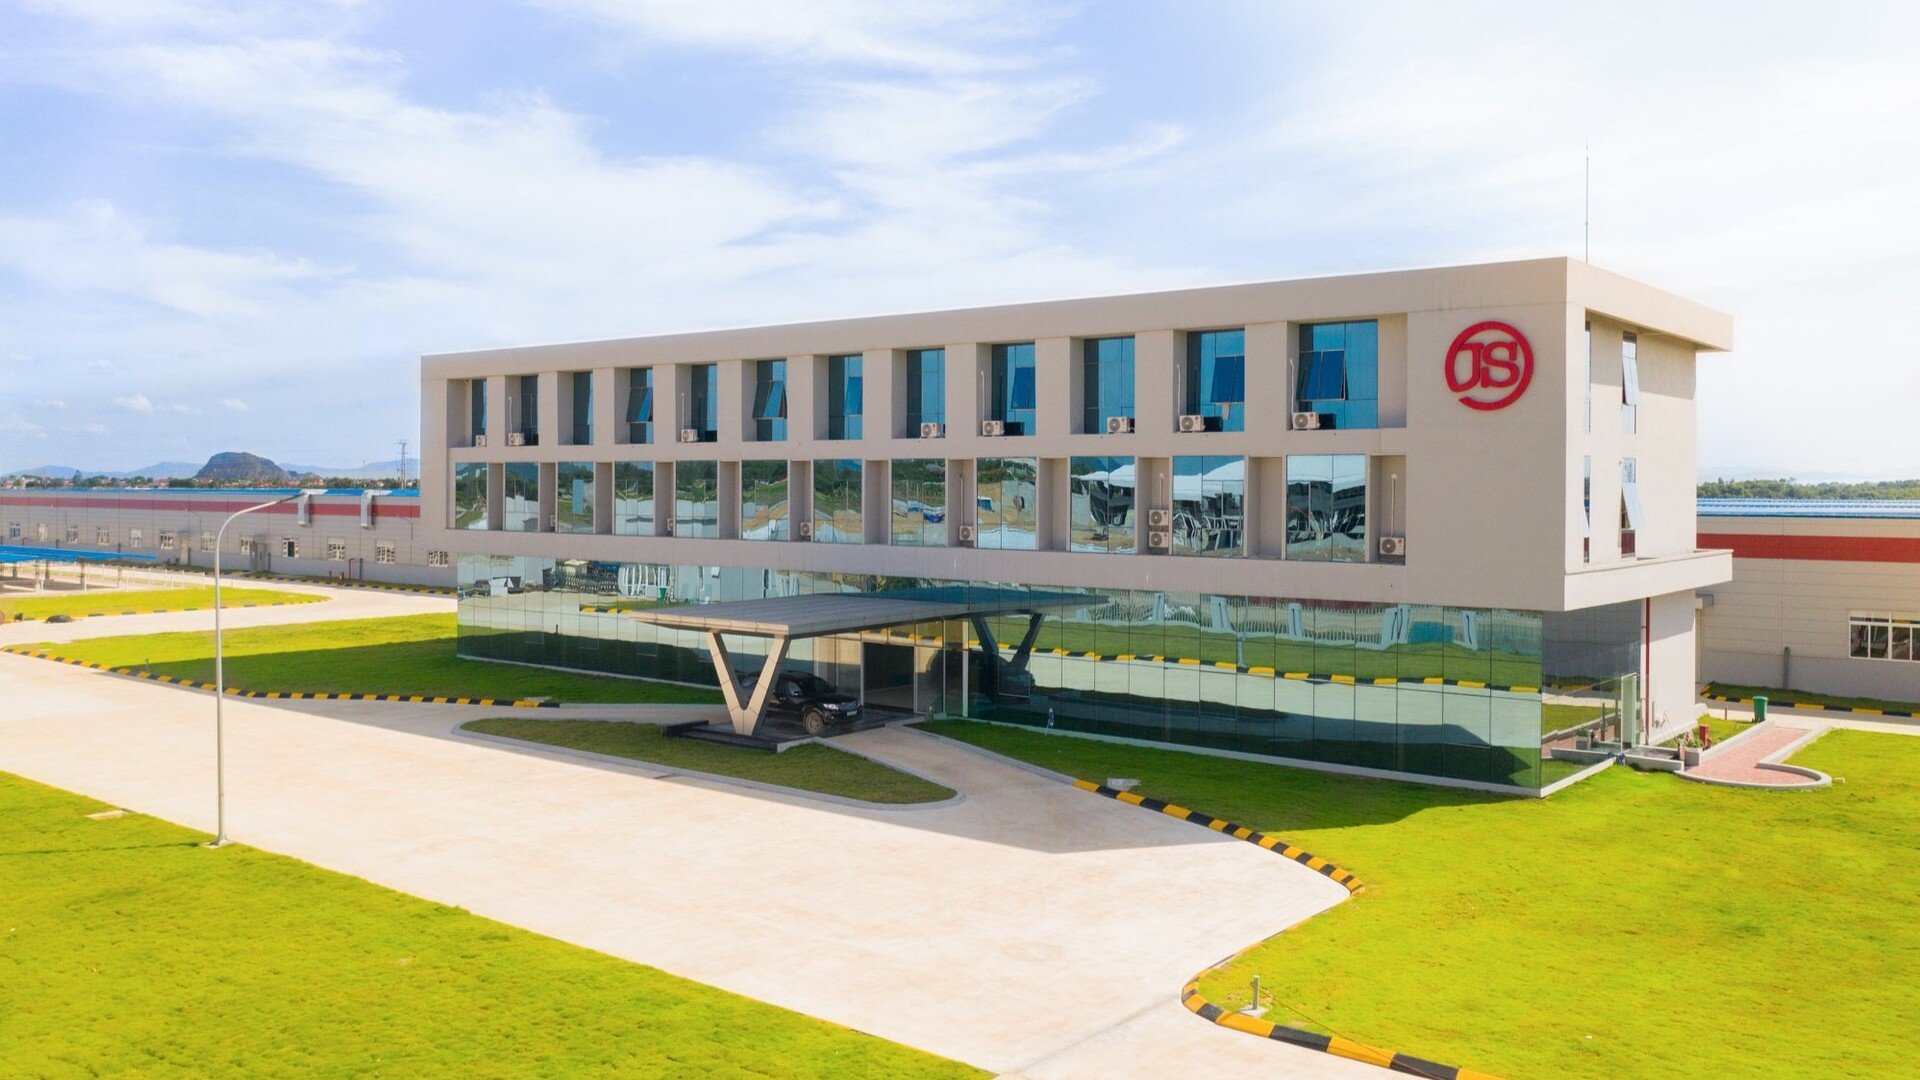 Zhejiang Jasan factory in Thanh Hoa province, central Vietnam. Photo courtesy of Giza Group - Industrial Investment Holdings.